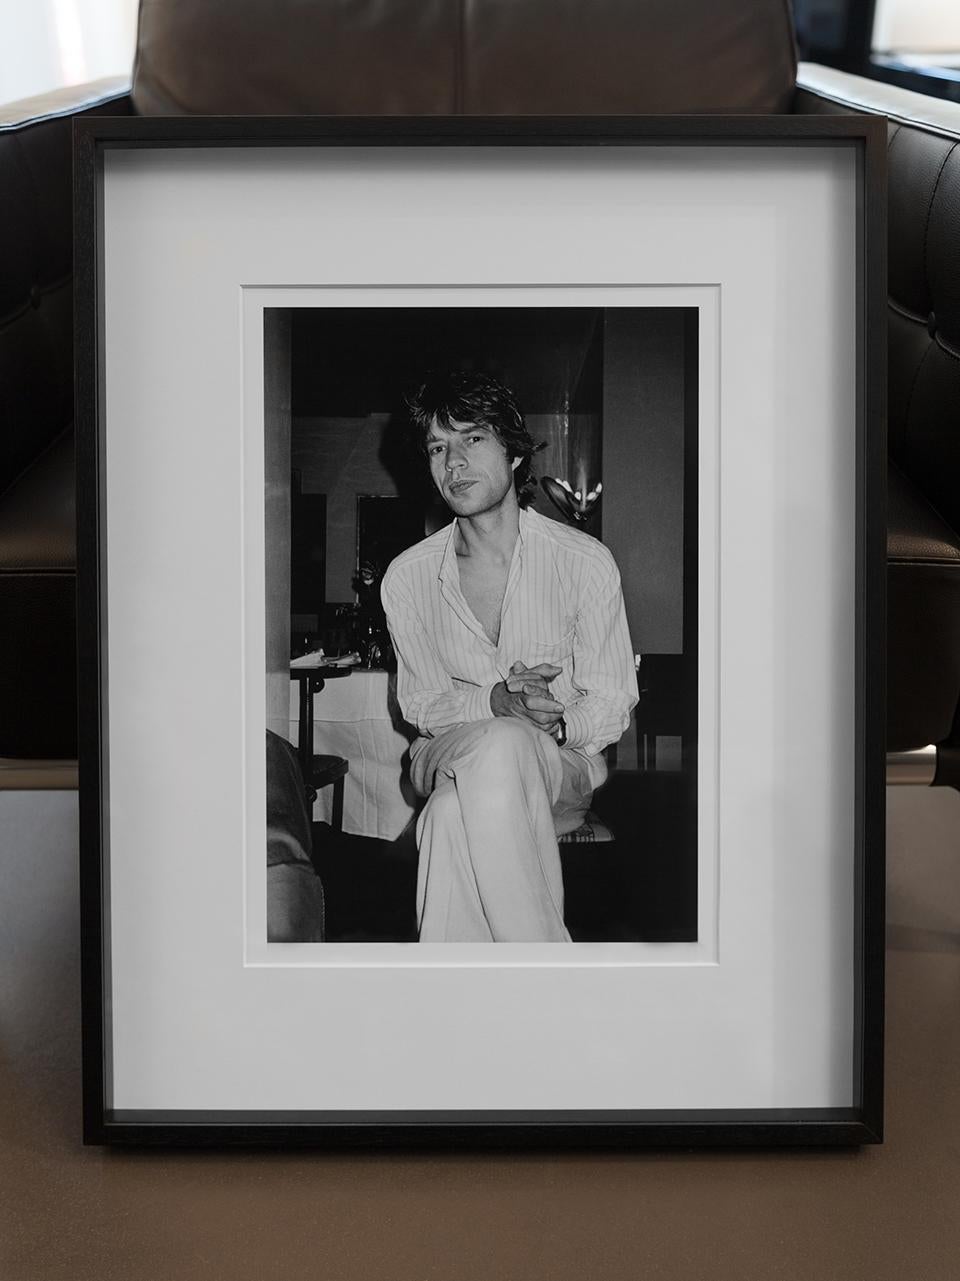 Mick Jagger Pleased, NYC the rockstar sitting in a pyjama on chair in hotelroom - Photograph by Roxanne Lowit